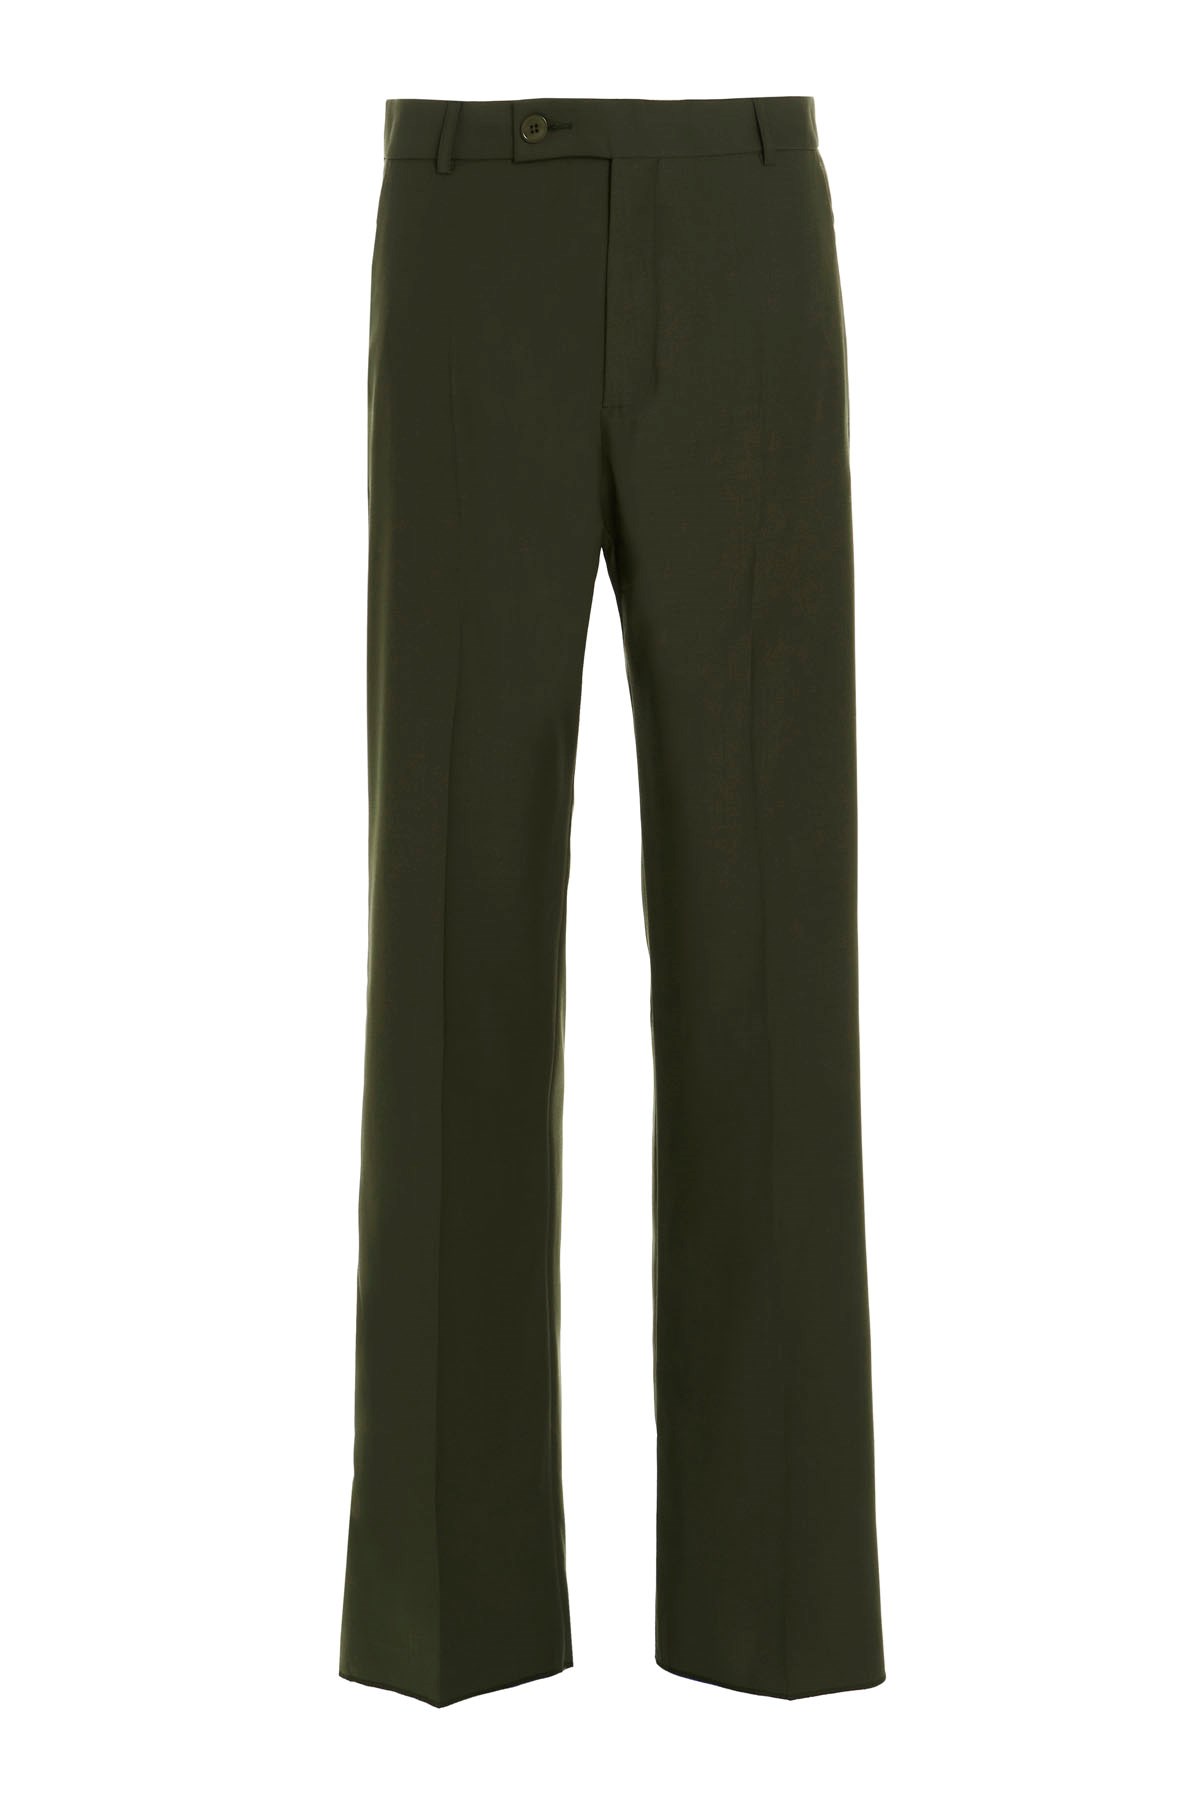 MARTINE ROSE Relaxed Fit Trousers